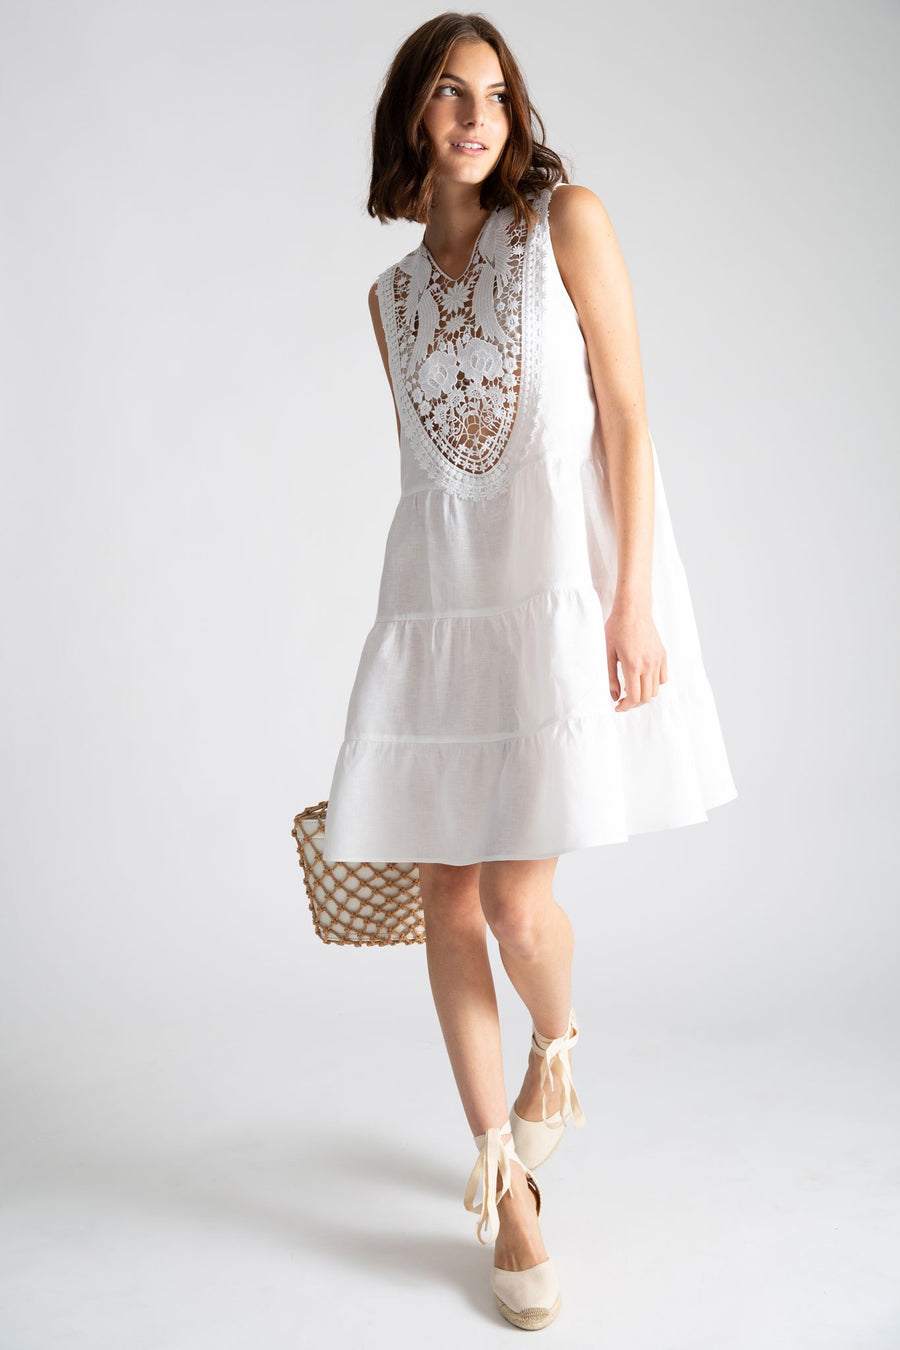 This is a photo of a woman wearing a white linen coverup dress that falls right about her knee and has 3 tiers. The front of the dress has a lace yolk that peeks through to her bikini top underneath. She is holding a white bag with natural netting over it and wearing natural colored espadrilles.